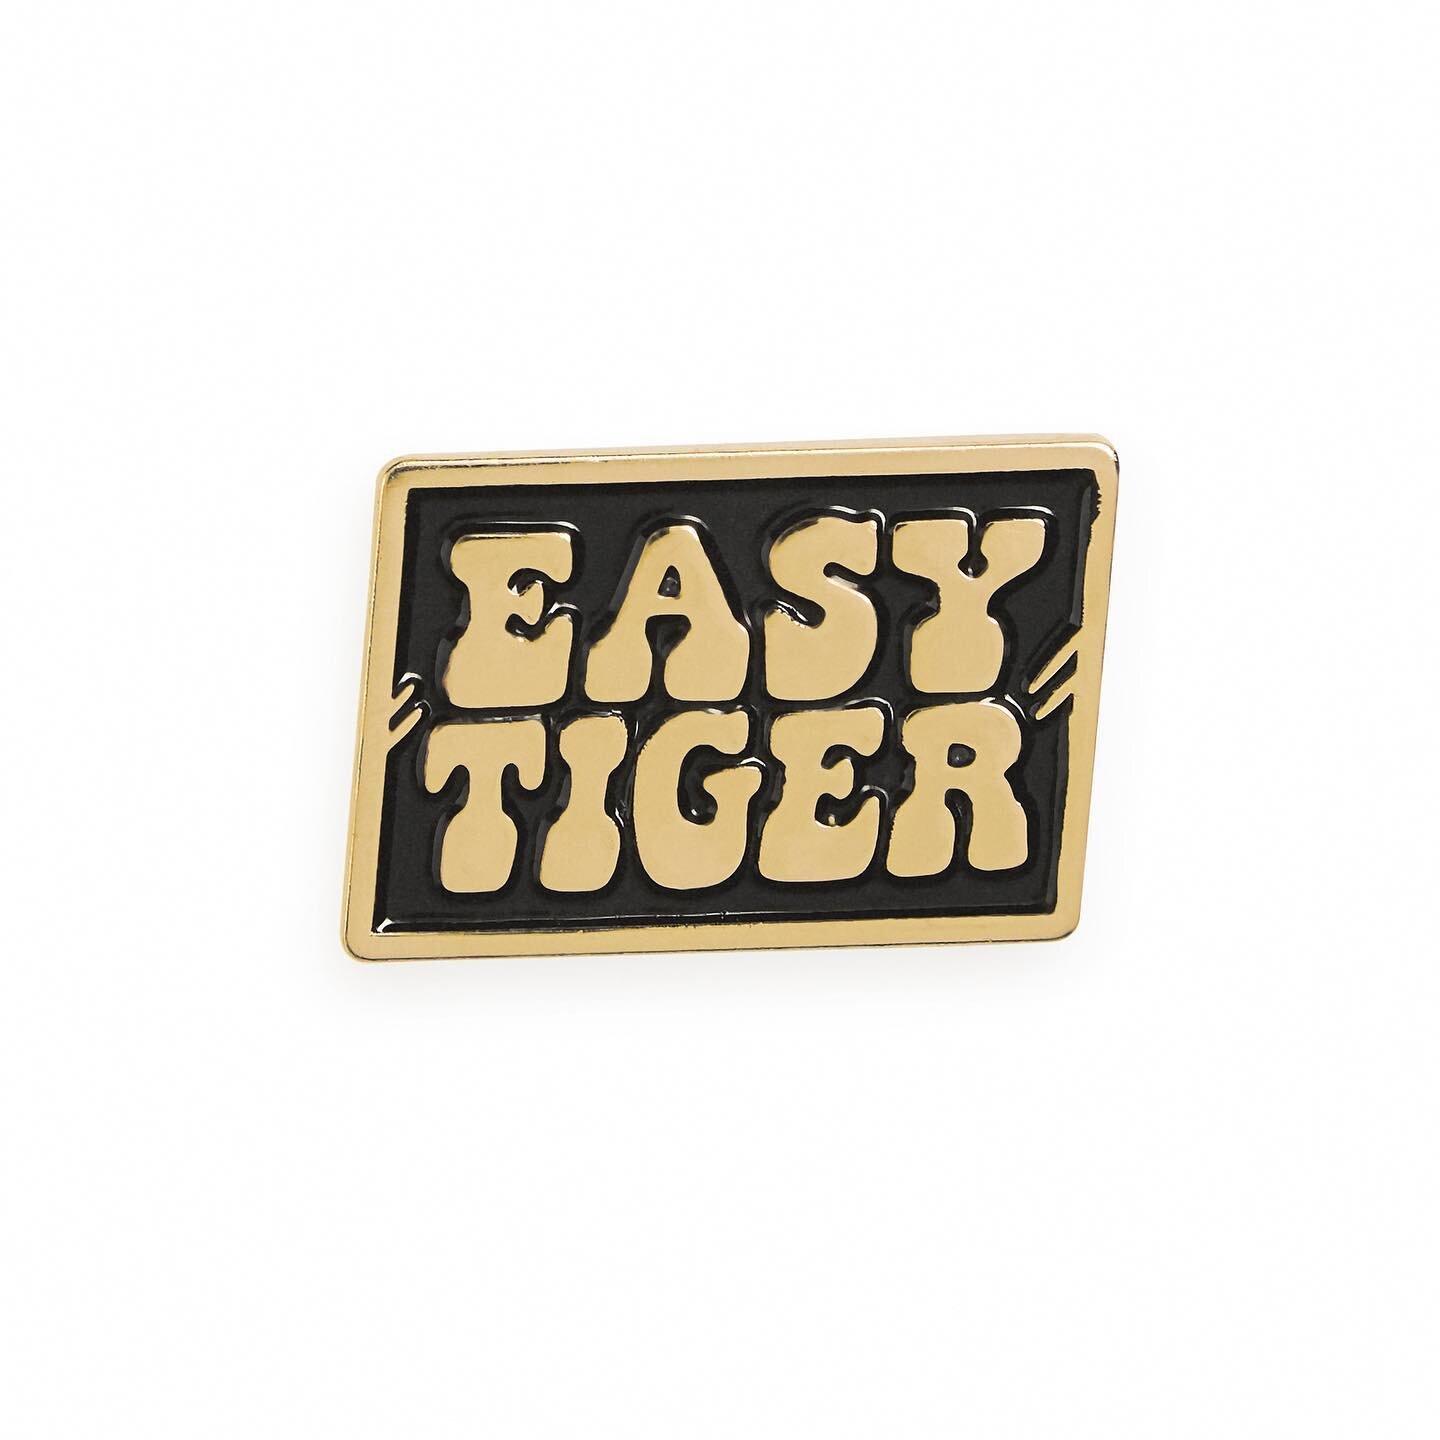 NEW SHIT
The new EASY TIGER pin. Because the world is going fucking bonkers and y&rsquo;all need to take a deep breath.
We&rsquo;ve added new keyrings, new pins, new patches and and a heap of fully-patched vests to the store. GO &lsquo;N GET IT.
www.